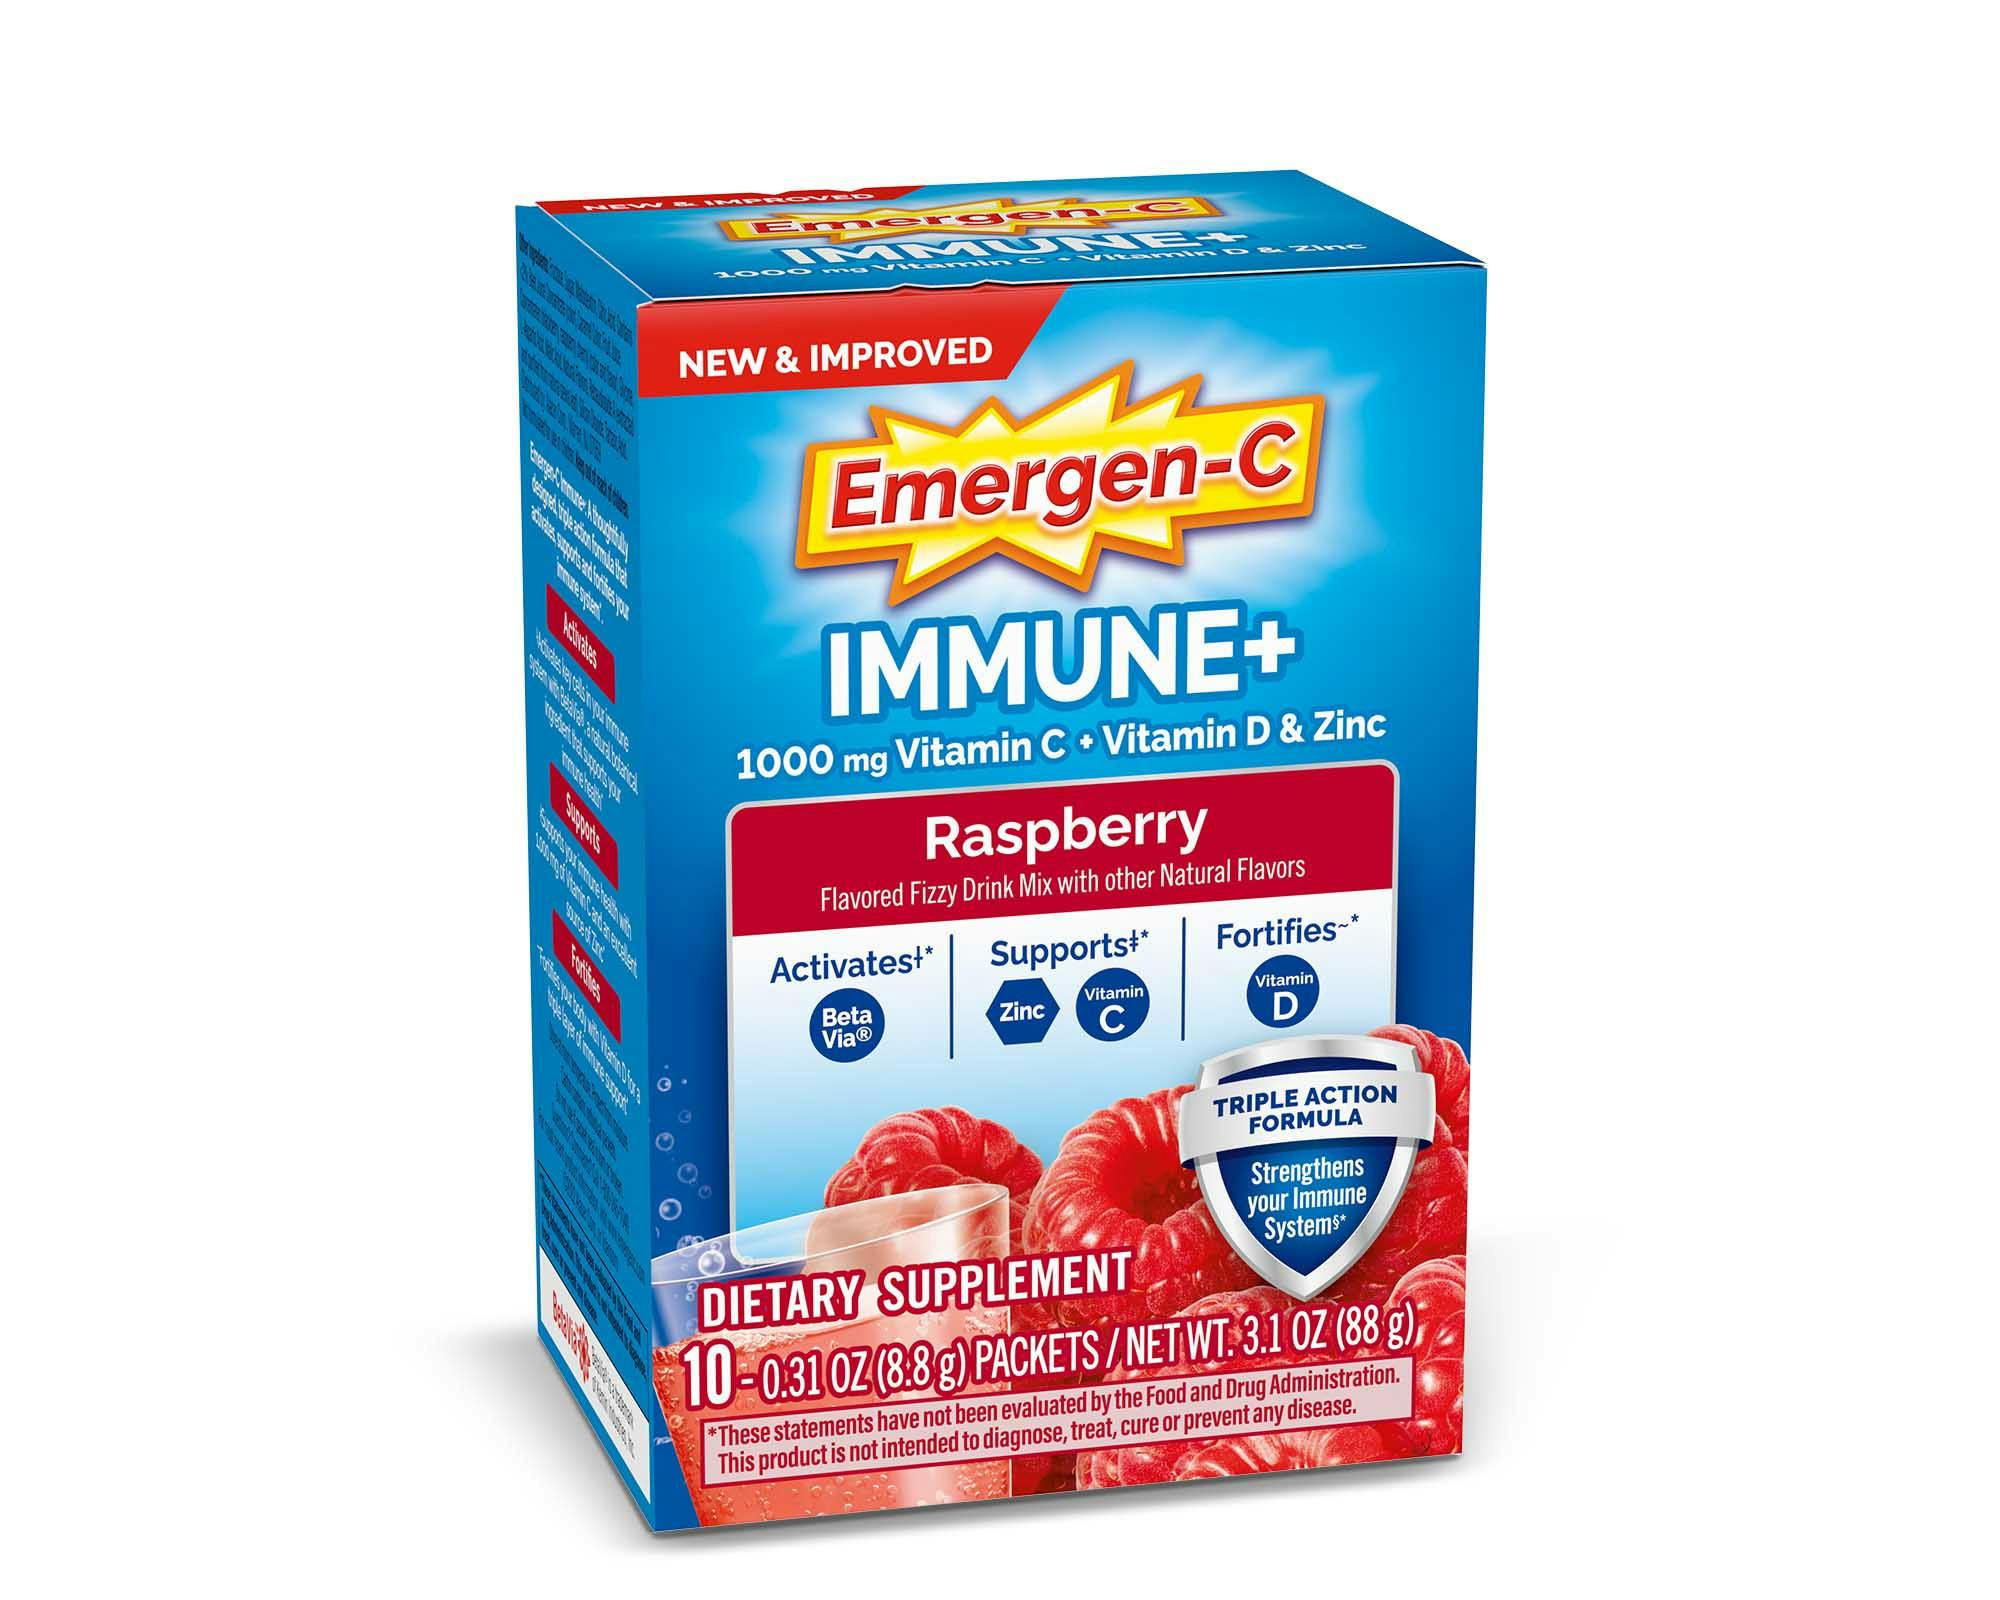 Angled view of Immune+ Raspberry with Triple Action product